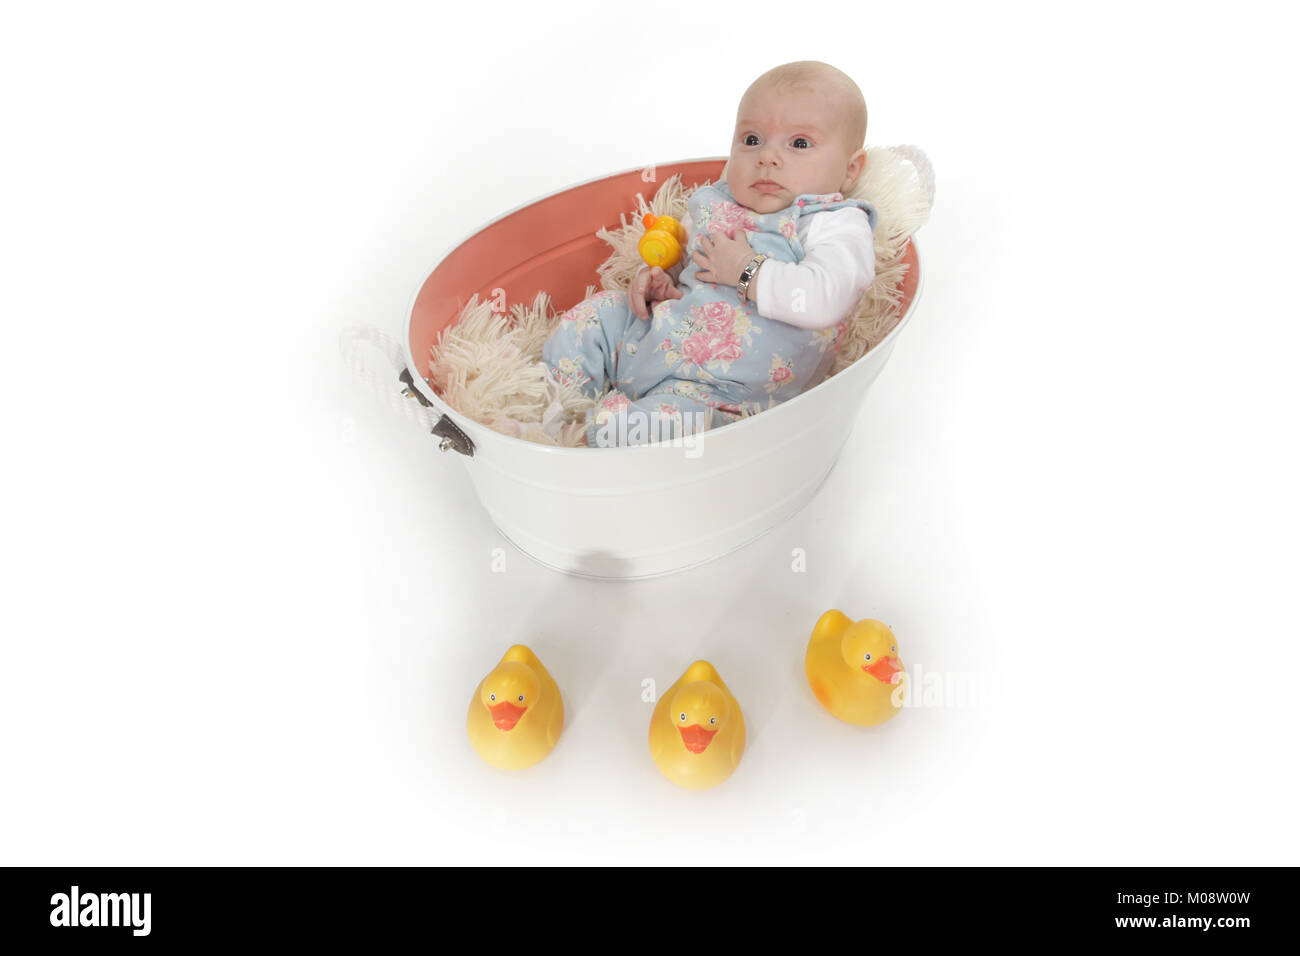 10 week old baby girl playing with rubber ducks in tub Stock Photo